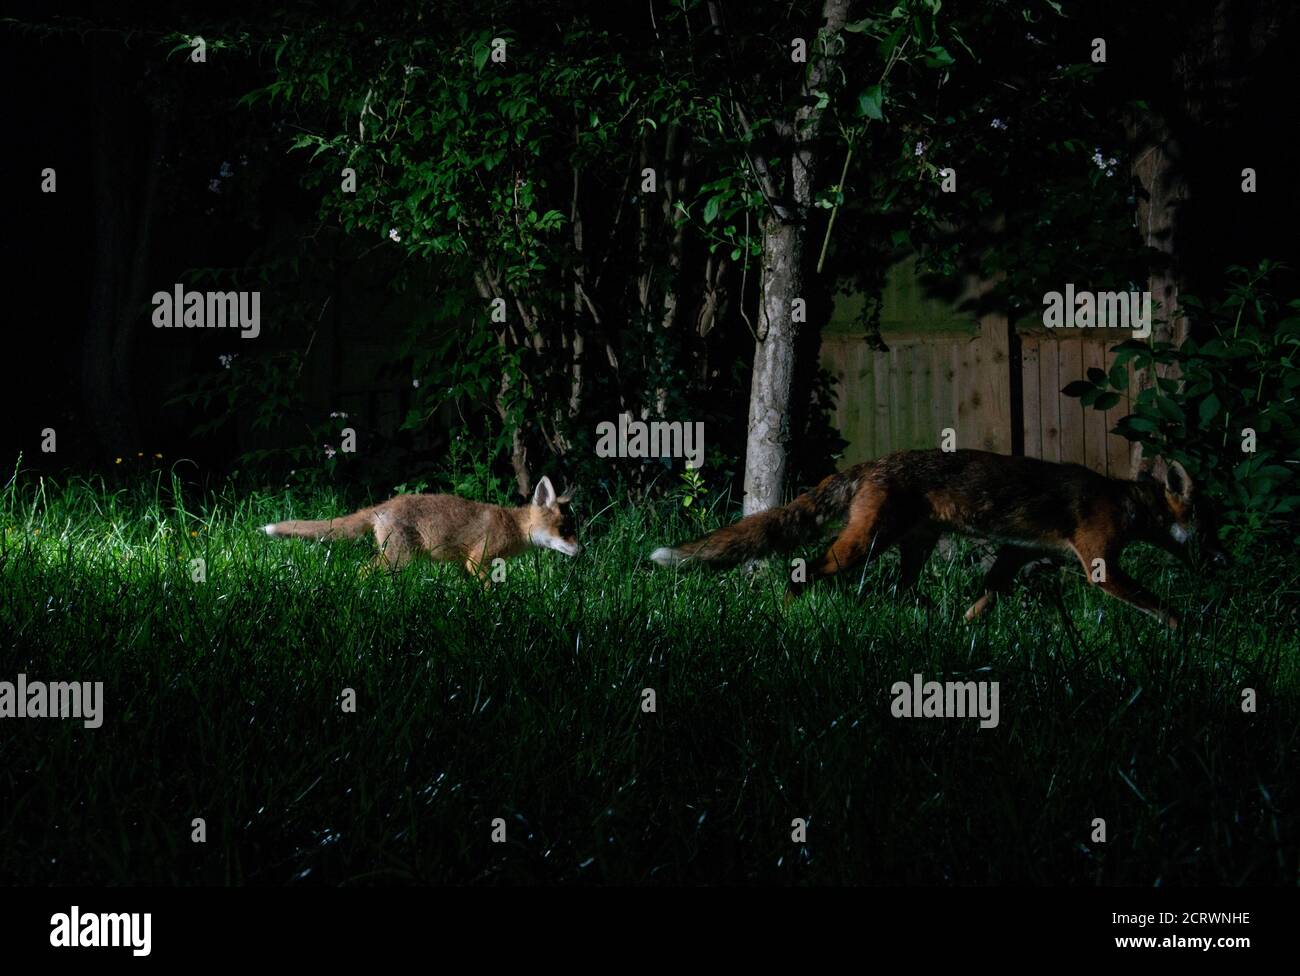 Foxes at night running down a lit pathway male fox in front and small cub running behind following, with fence and trees behind and grass foreground Stock Photo